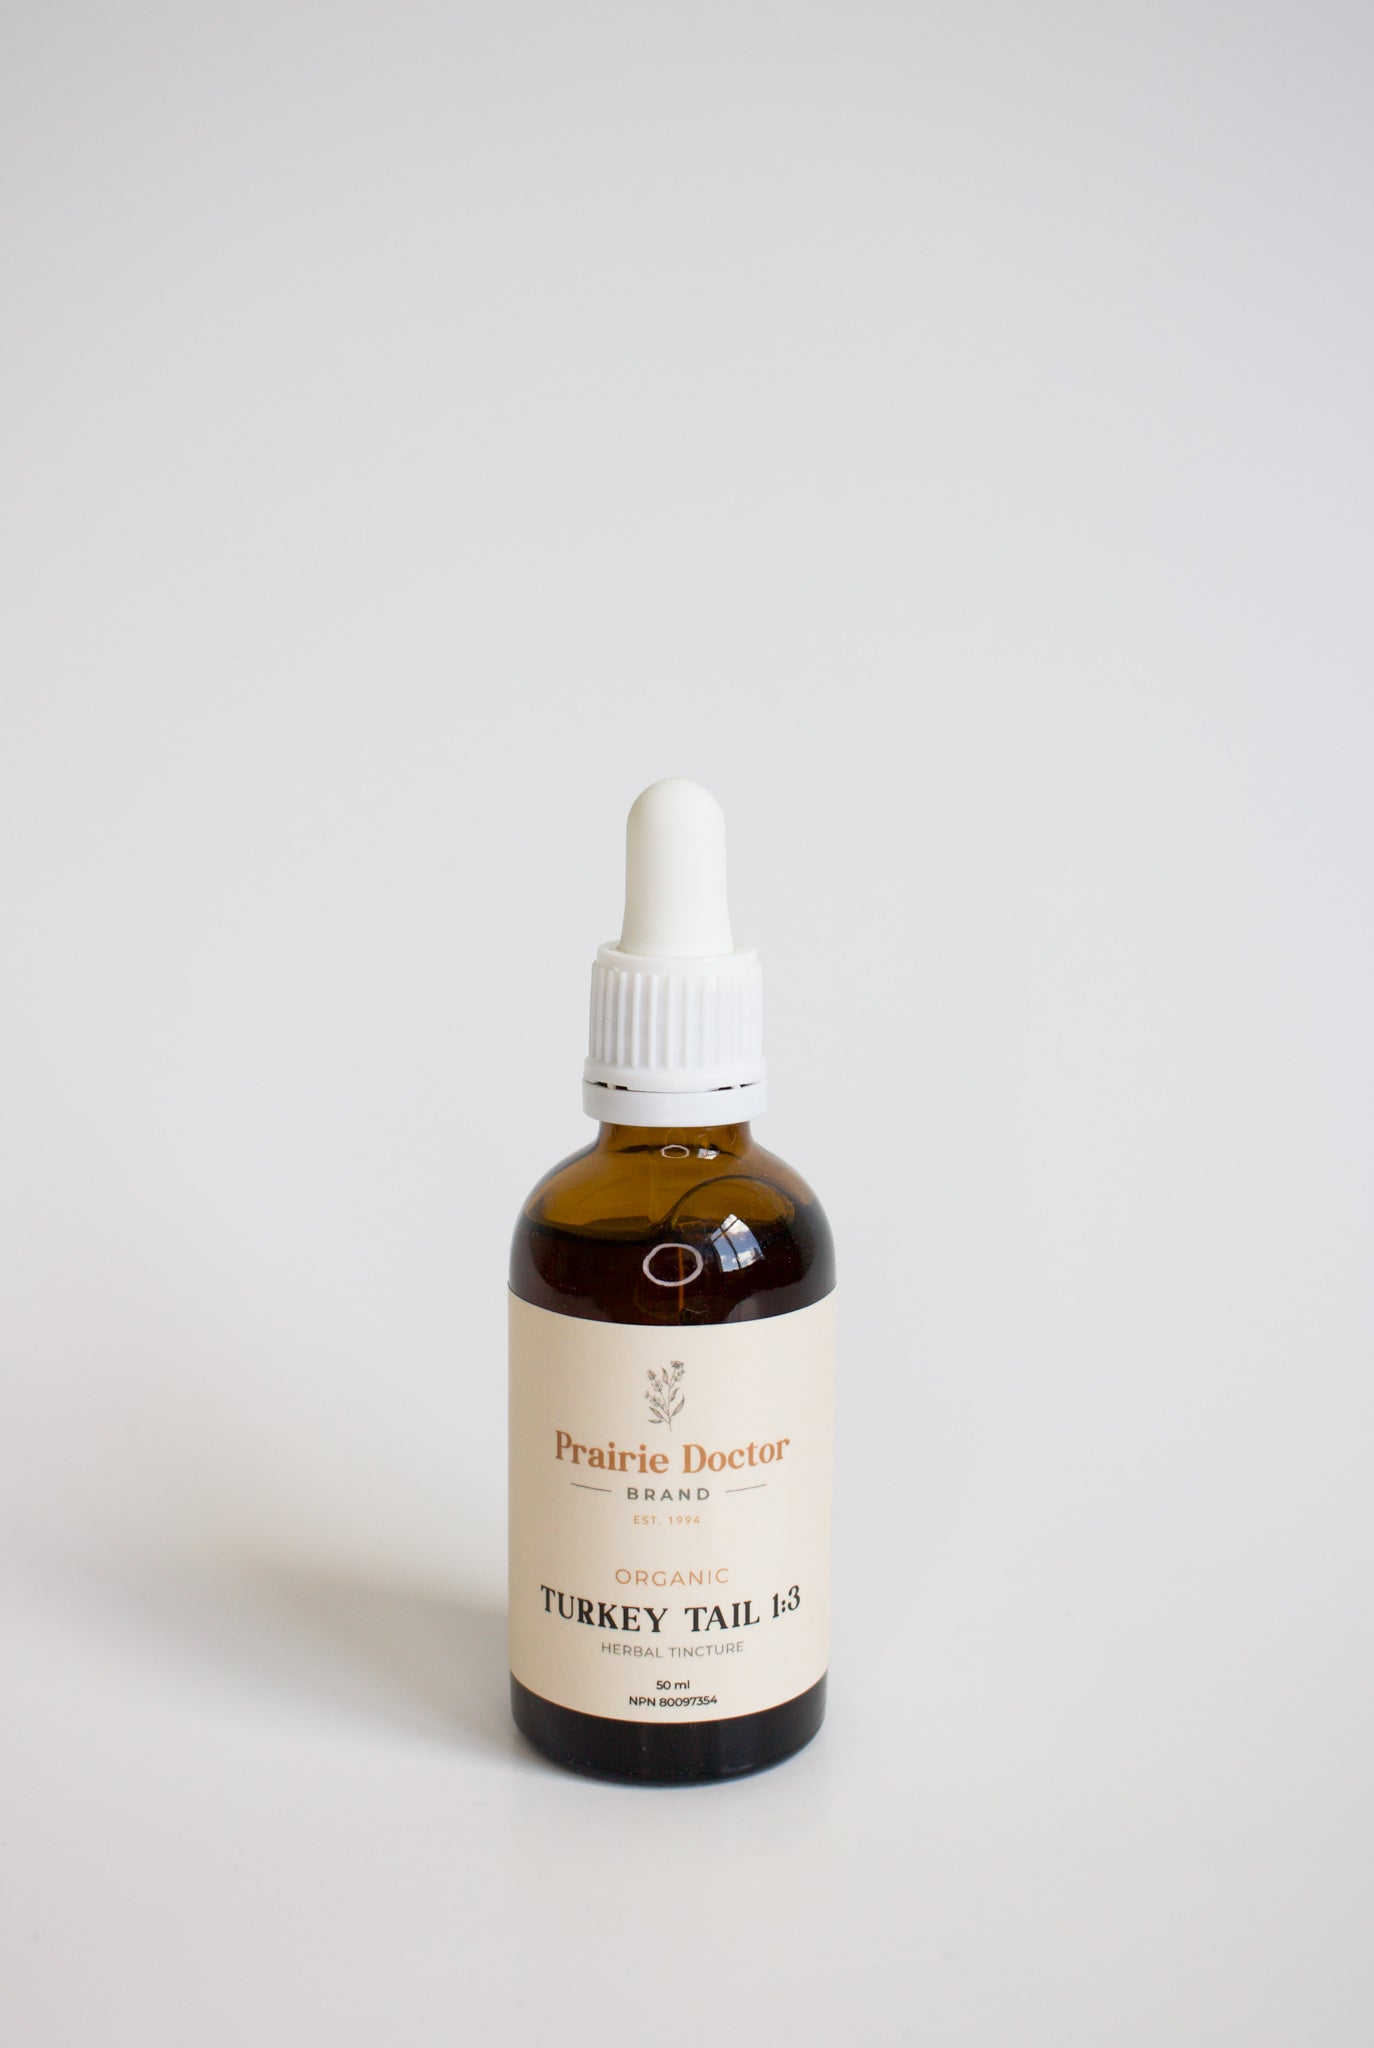 Our organic Turkey Tail mushroom tincture can be used as a source of fungal polysaccharides with immunomodulating properties.